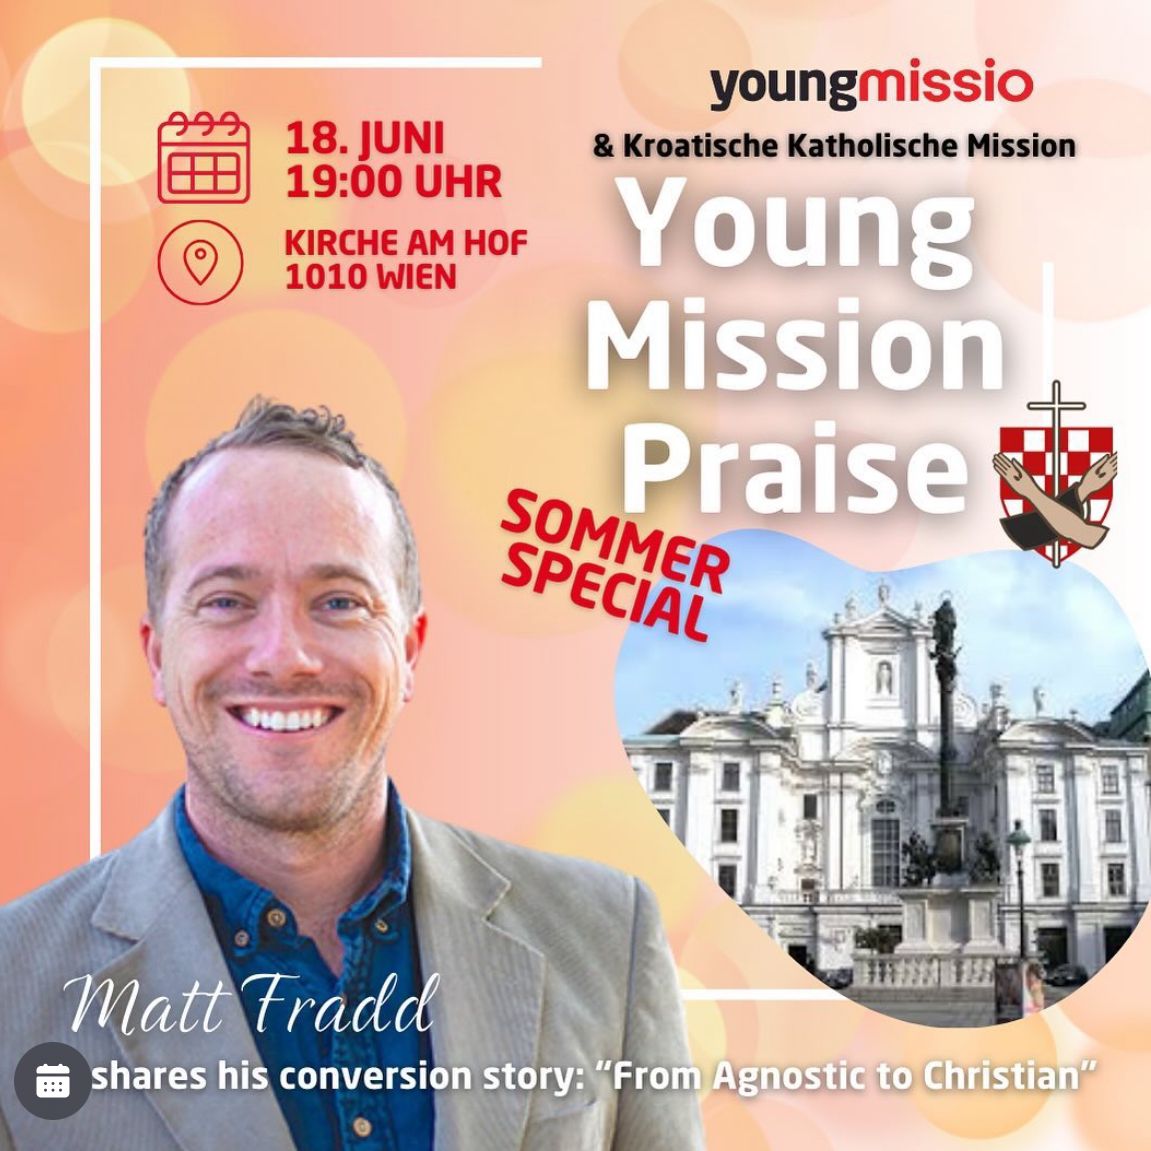 Young Mission Praise - Summer Special